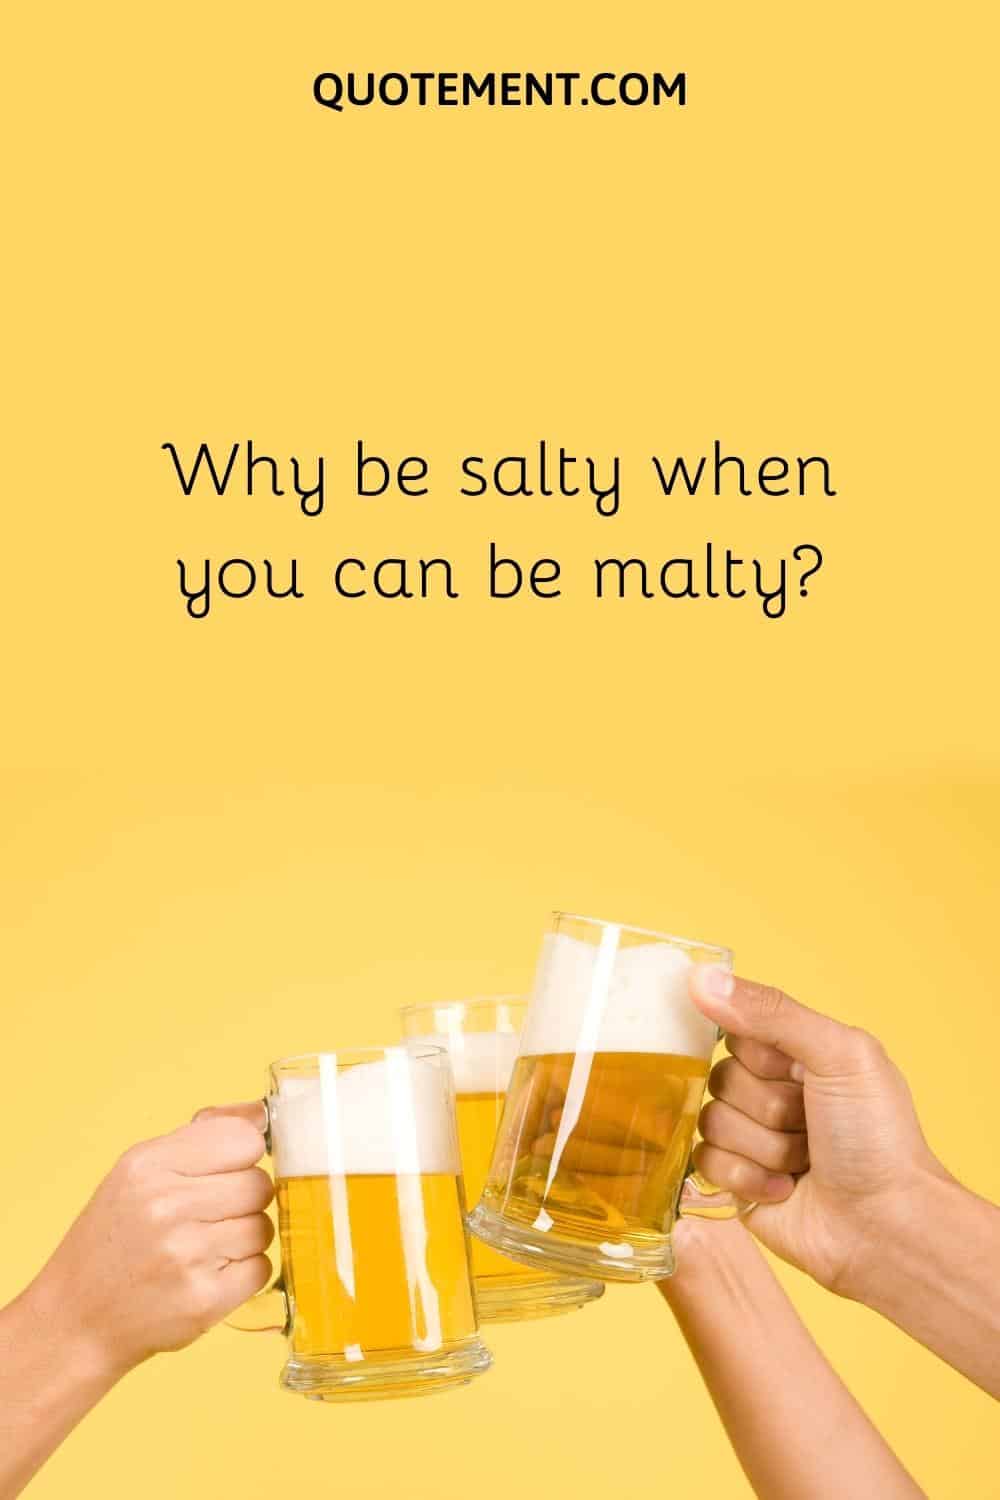 Why be salty when you can be malty